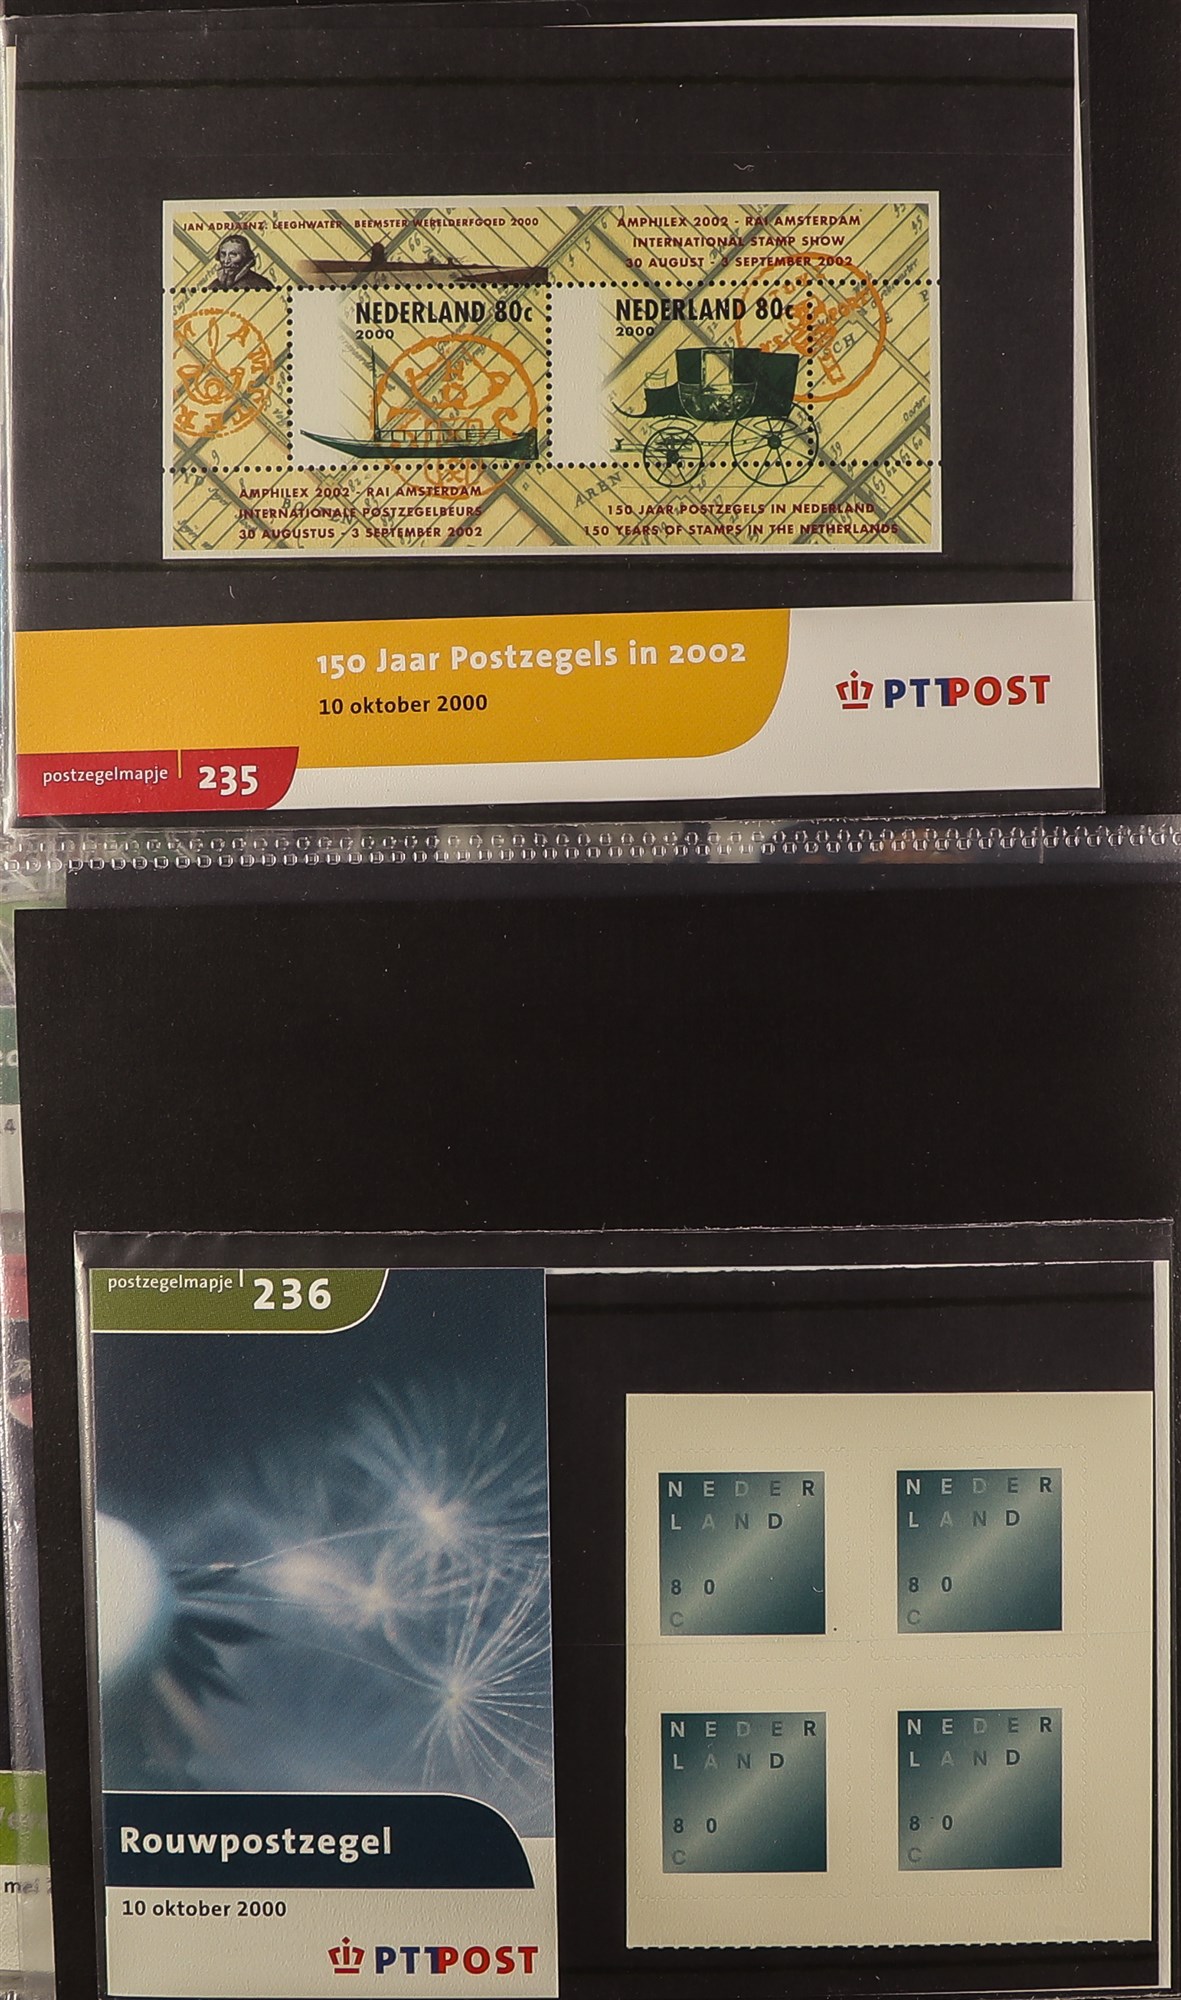 NETHERLANDS 1960's-2000's NEVER HINGED MINT ISSUES with PTT new issue stamp folders, presentation - Image 12 of 13